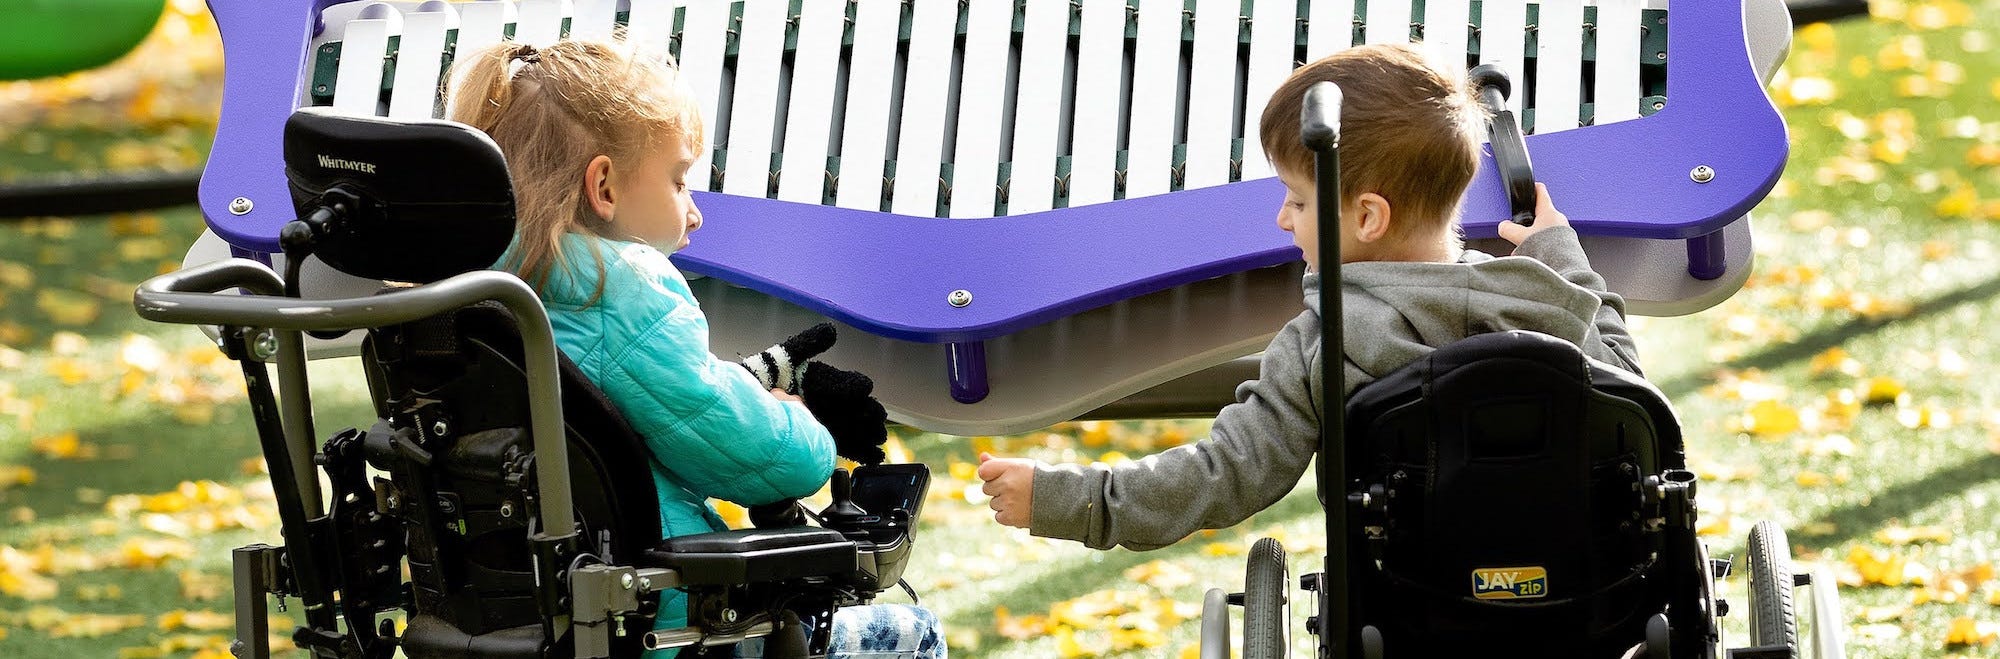 Inclusive Playground Products: 10 of Our Favorites